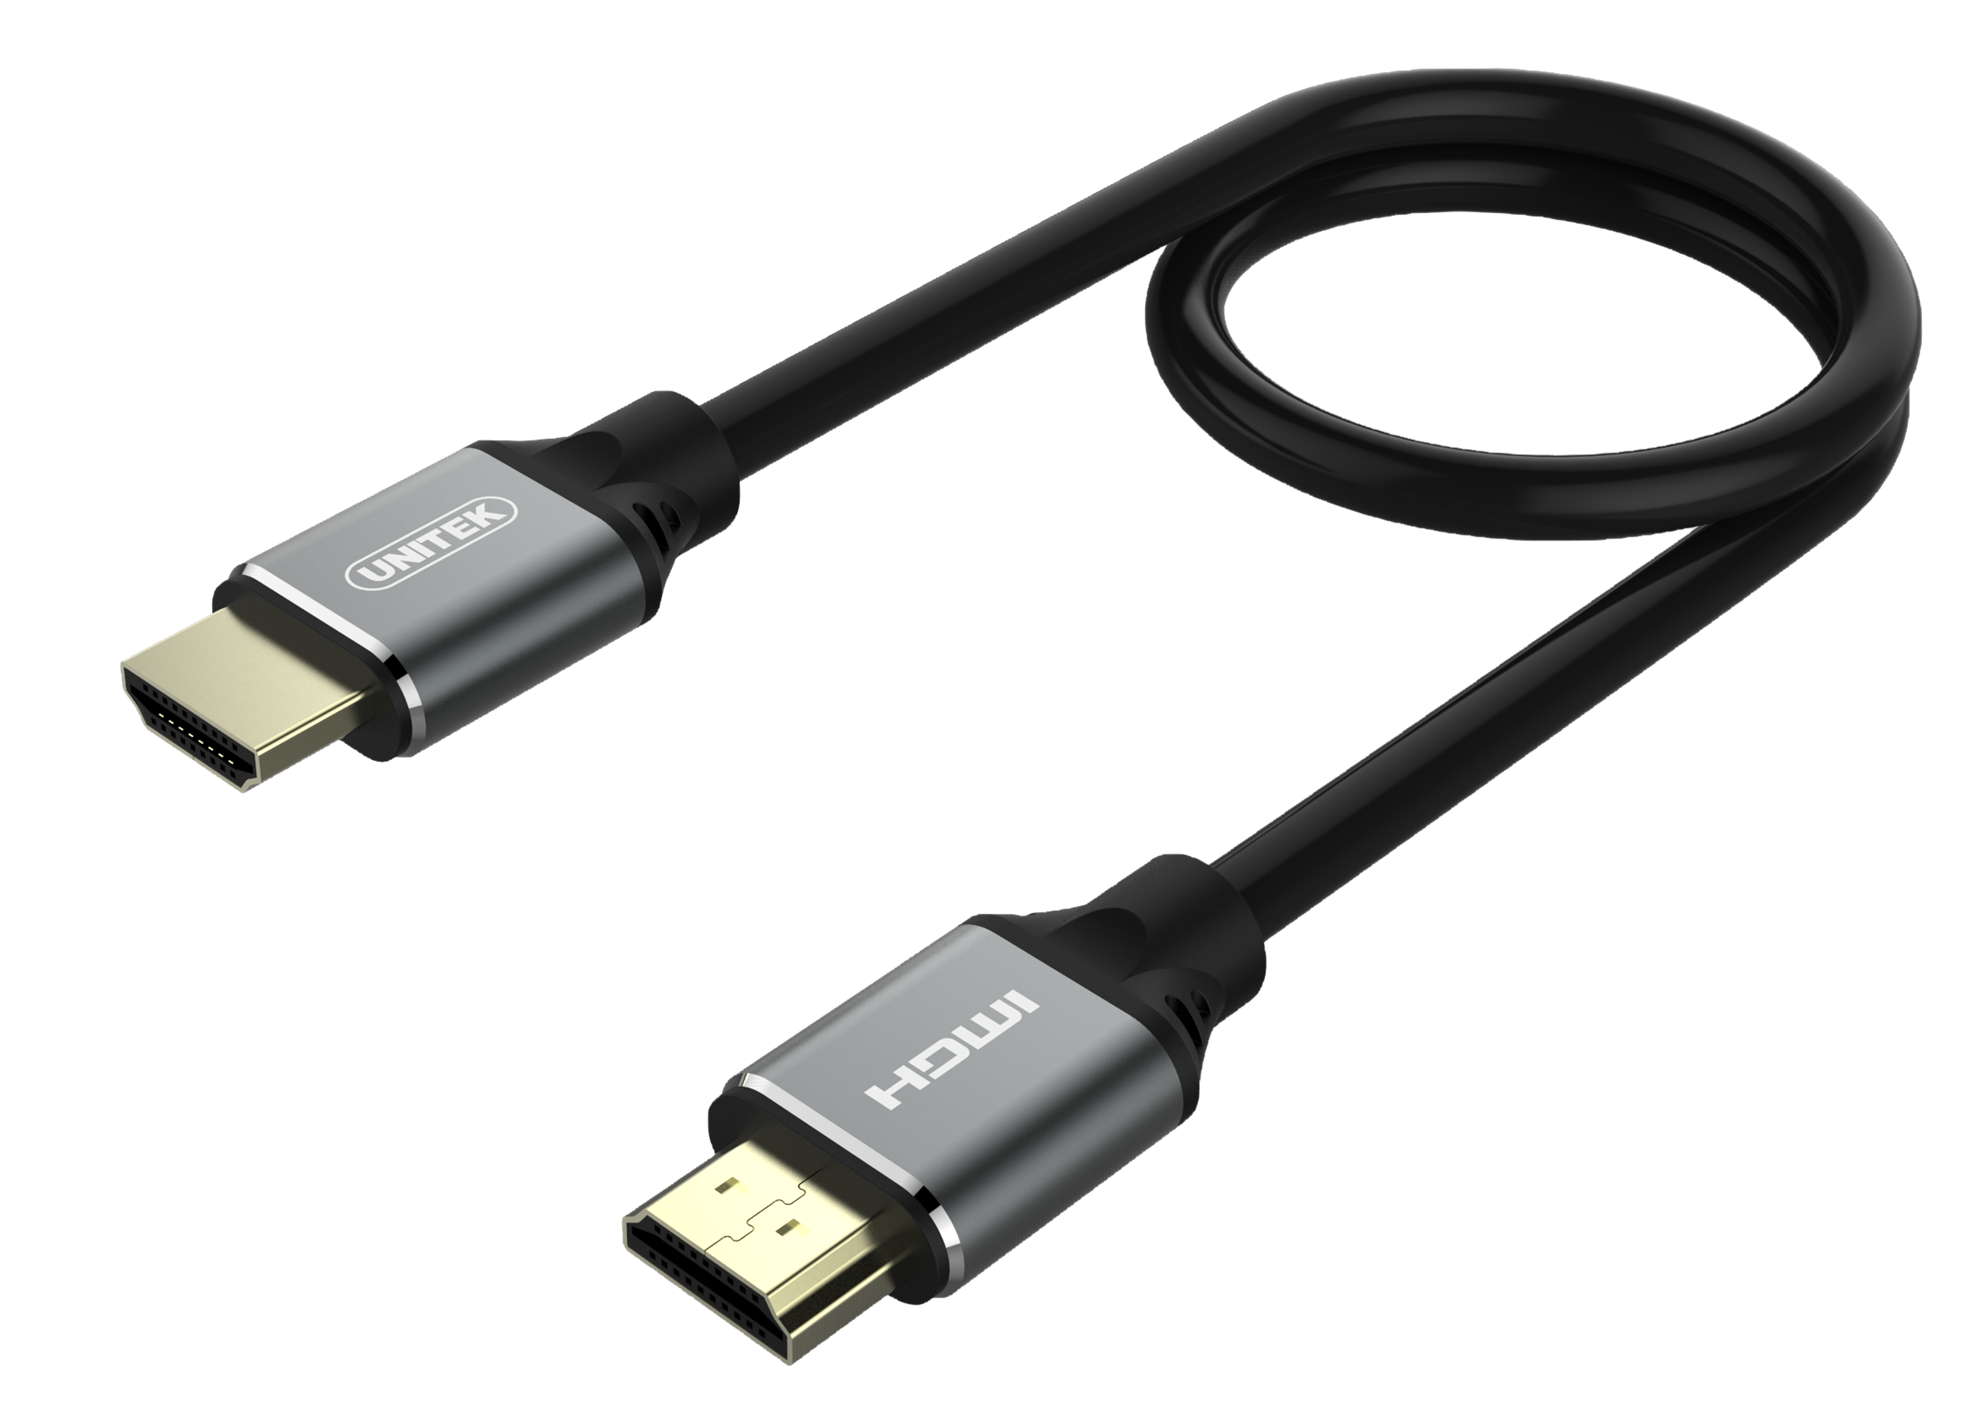 UNITEK_1.5m_HDMI_2.1_Full_UHD_Cable_Supports_up_to_8K._Max._Res_7680x4320@60Hz_&_4K@120Hz._Supports_Dynamic_HDR,_Dolby_Vision_HDR_10,_3D_Video._24k_Gold-plated_Connectors._Backwards_Compatible. 267